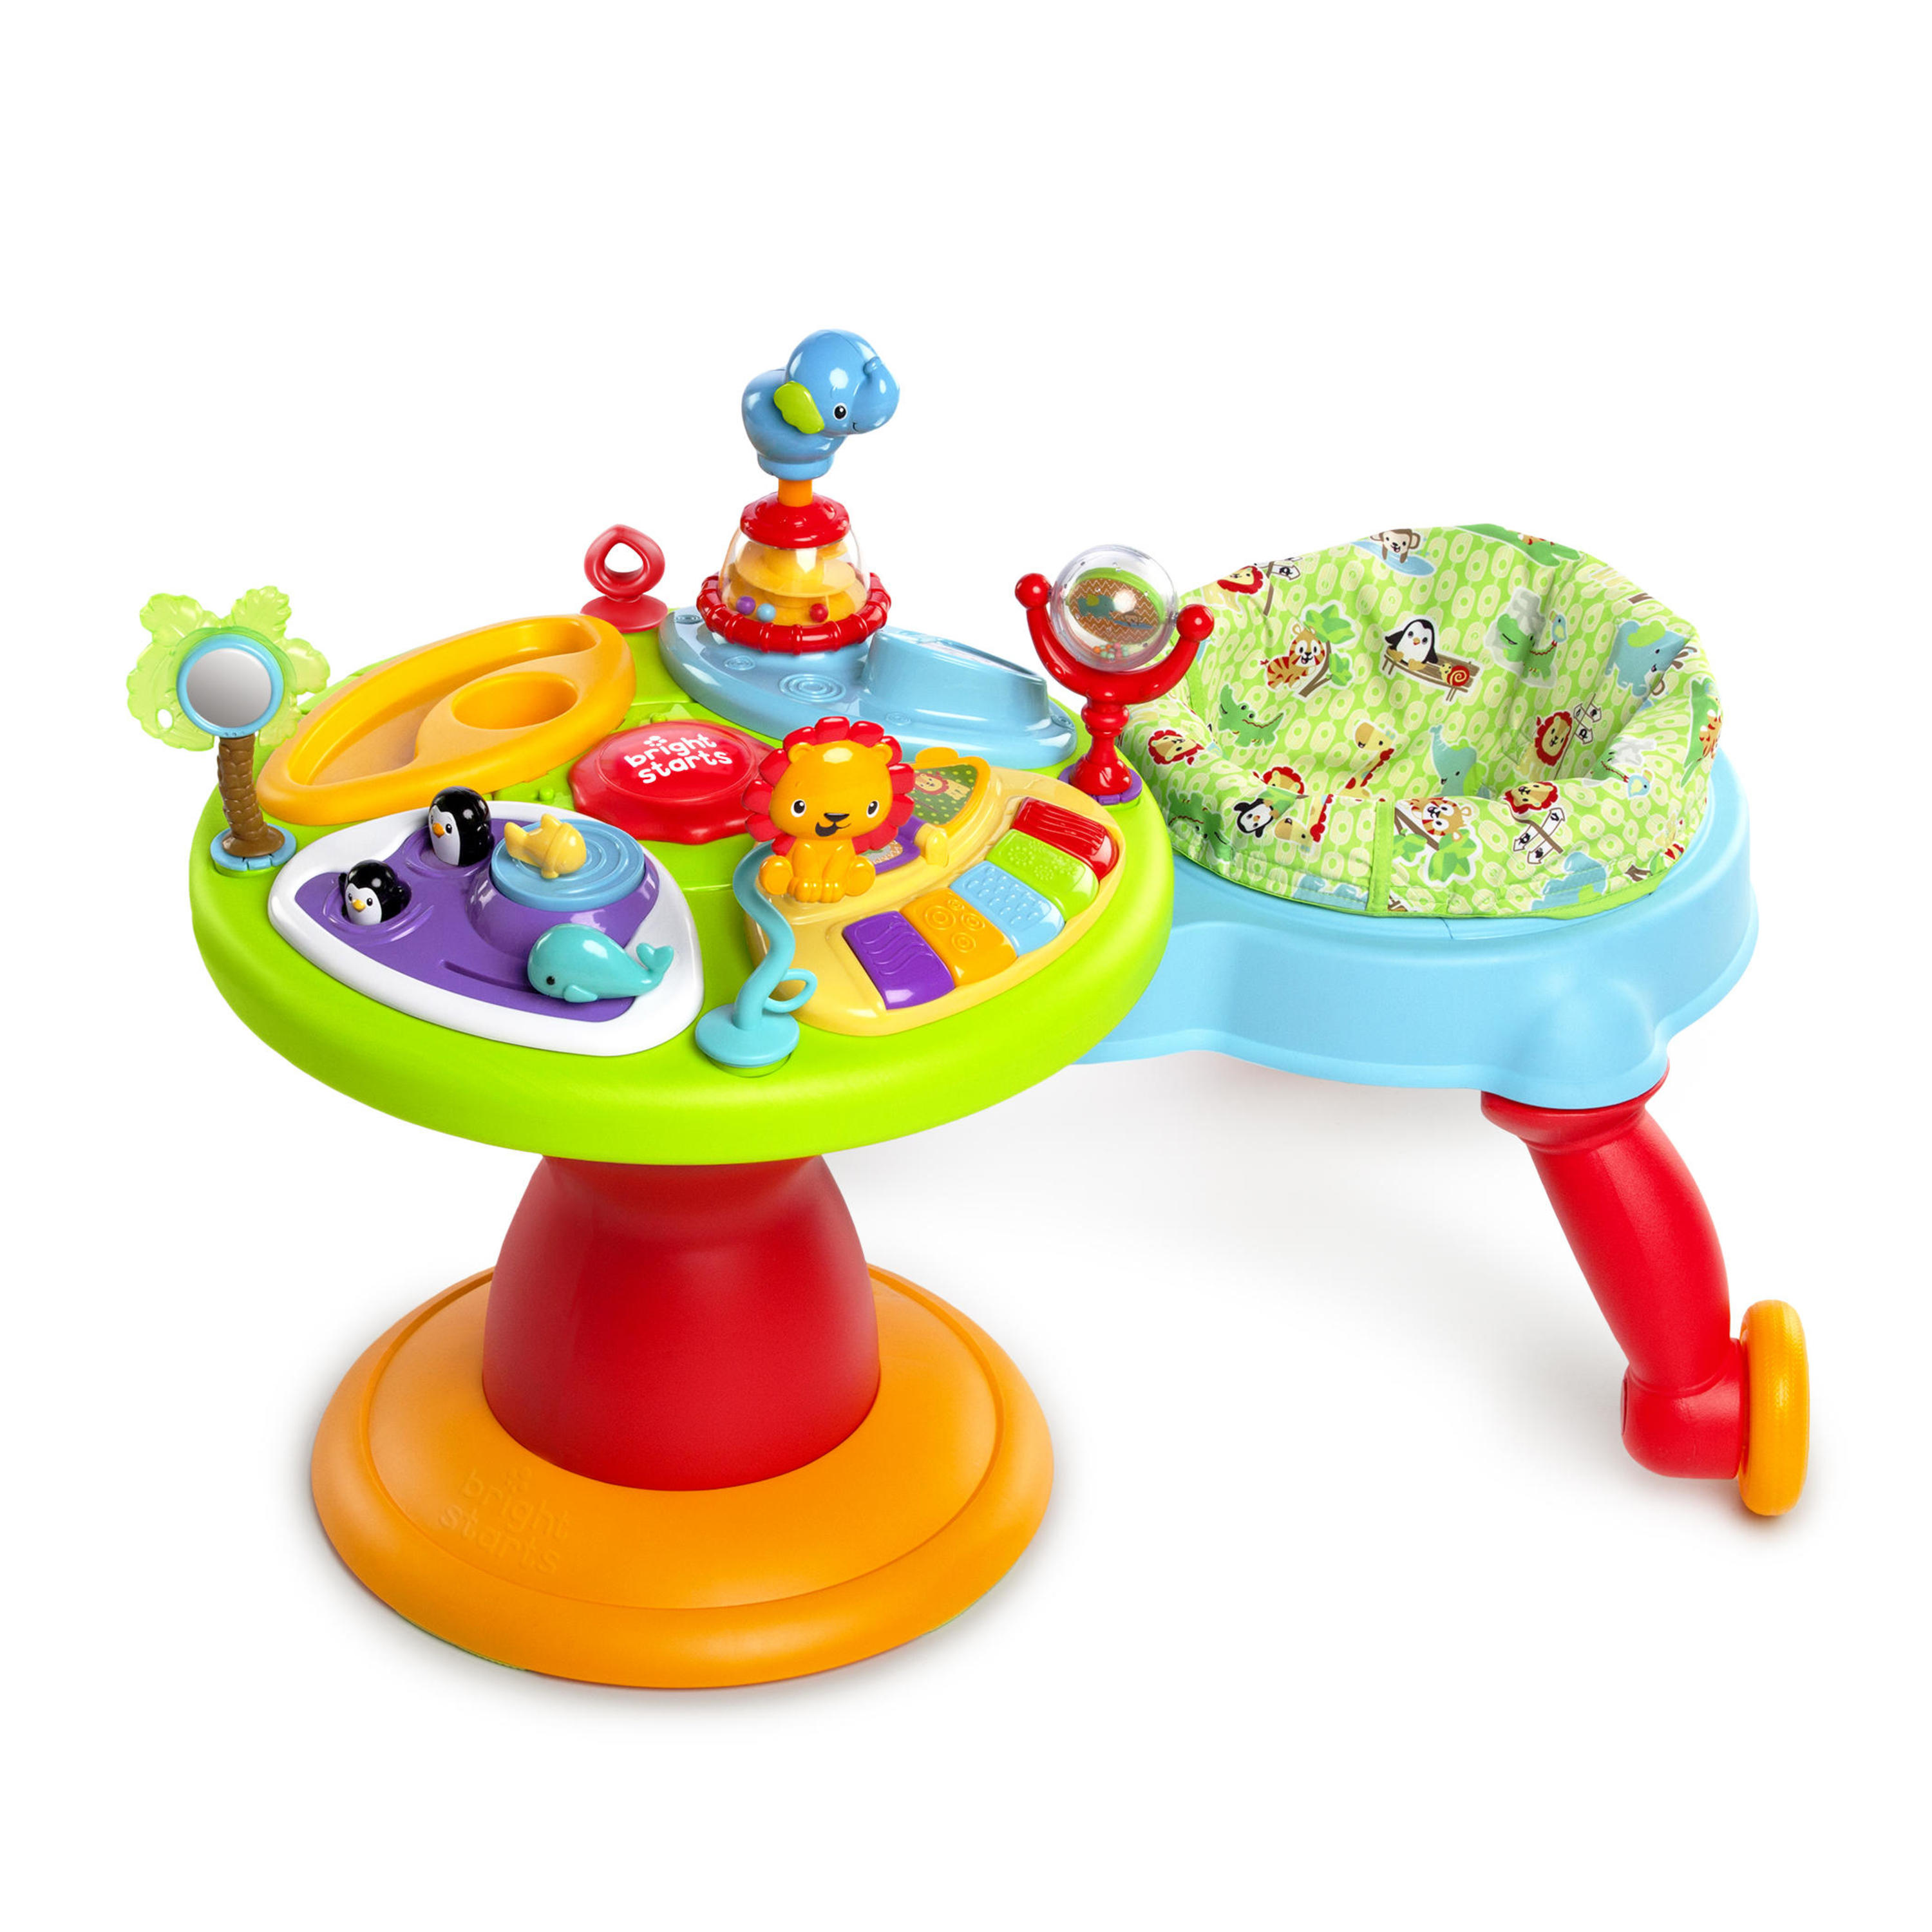 Bright Starts 3-in-1 Around We Go Activity Center, Ages 6 months + - image 1 of 7